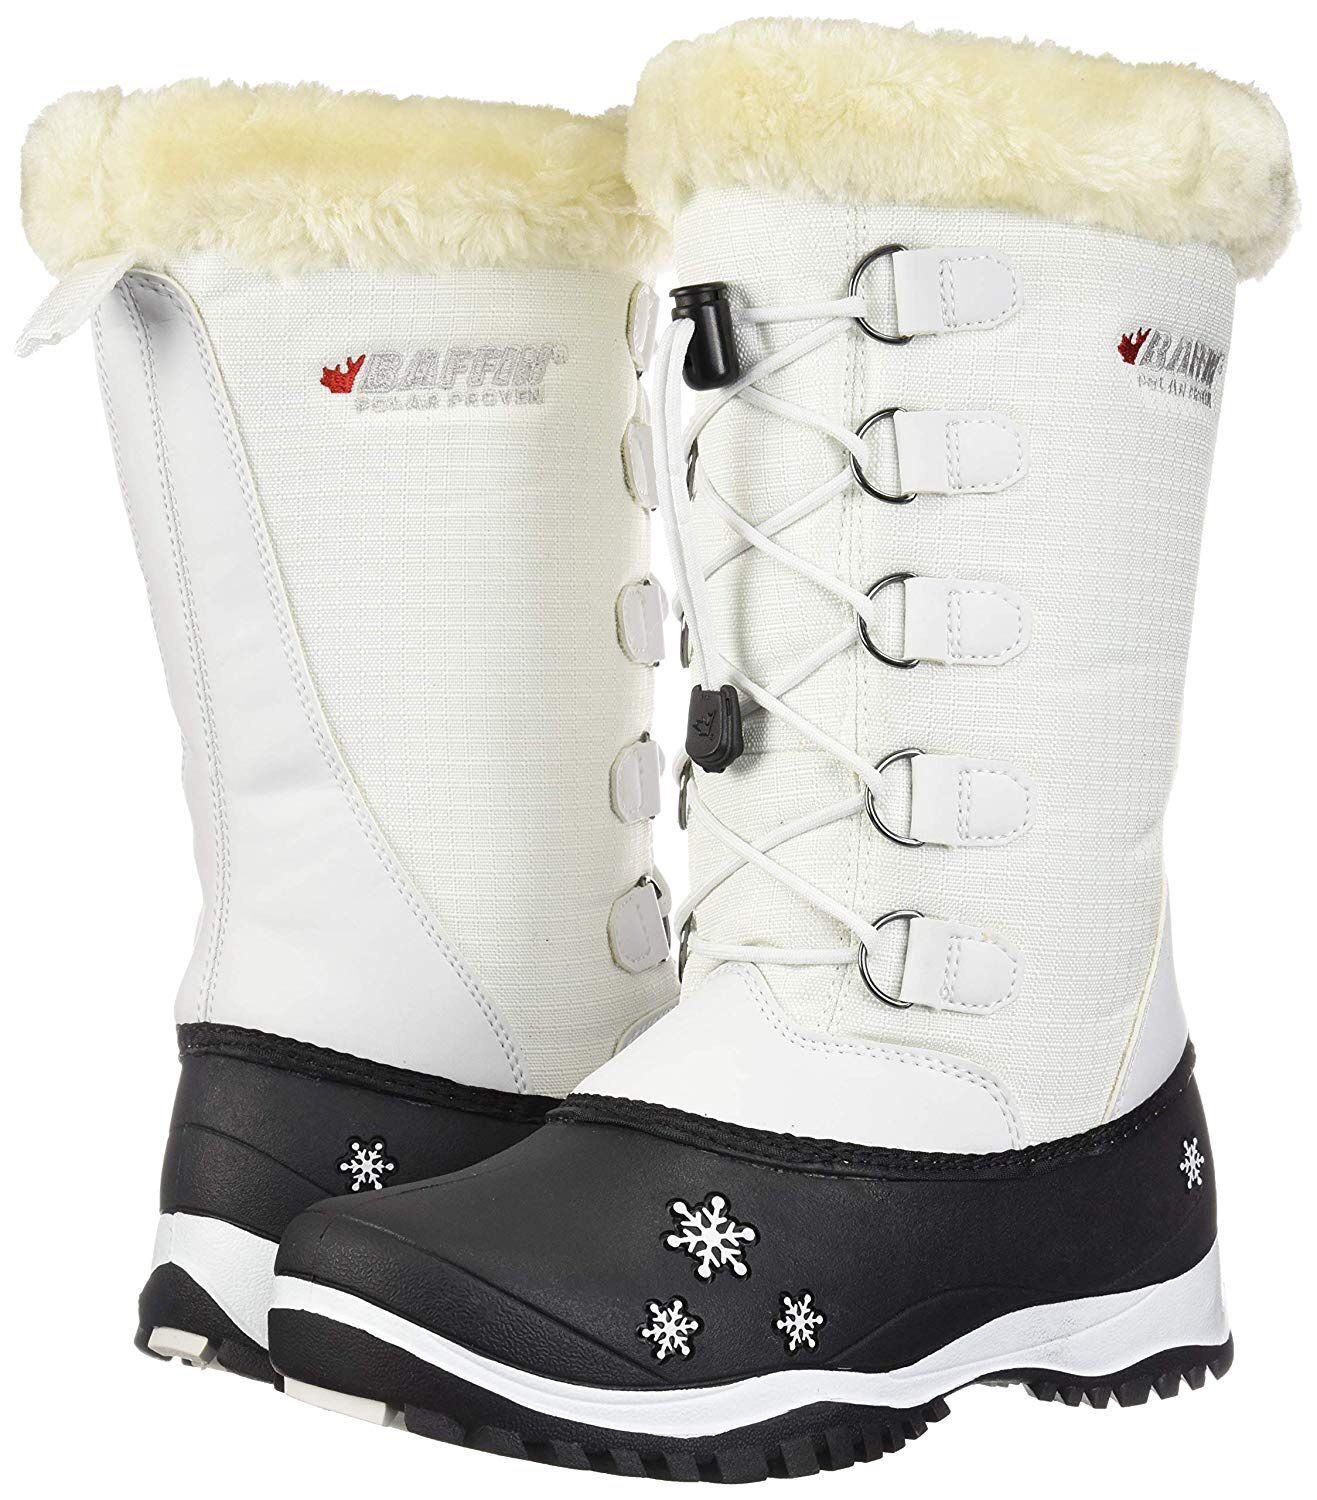 Toddler Size 5 Baffin Emma Snow Boots - Brand New in Box